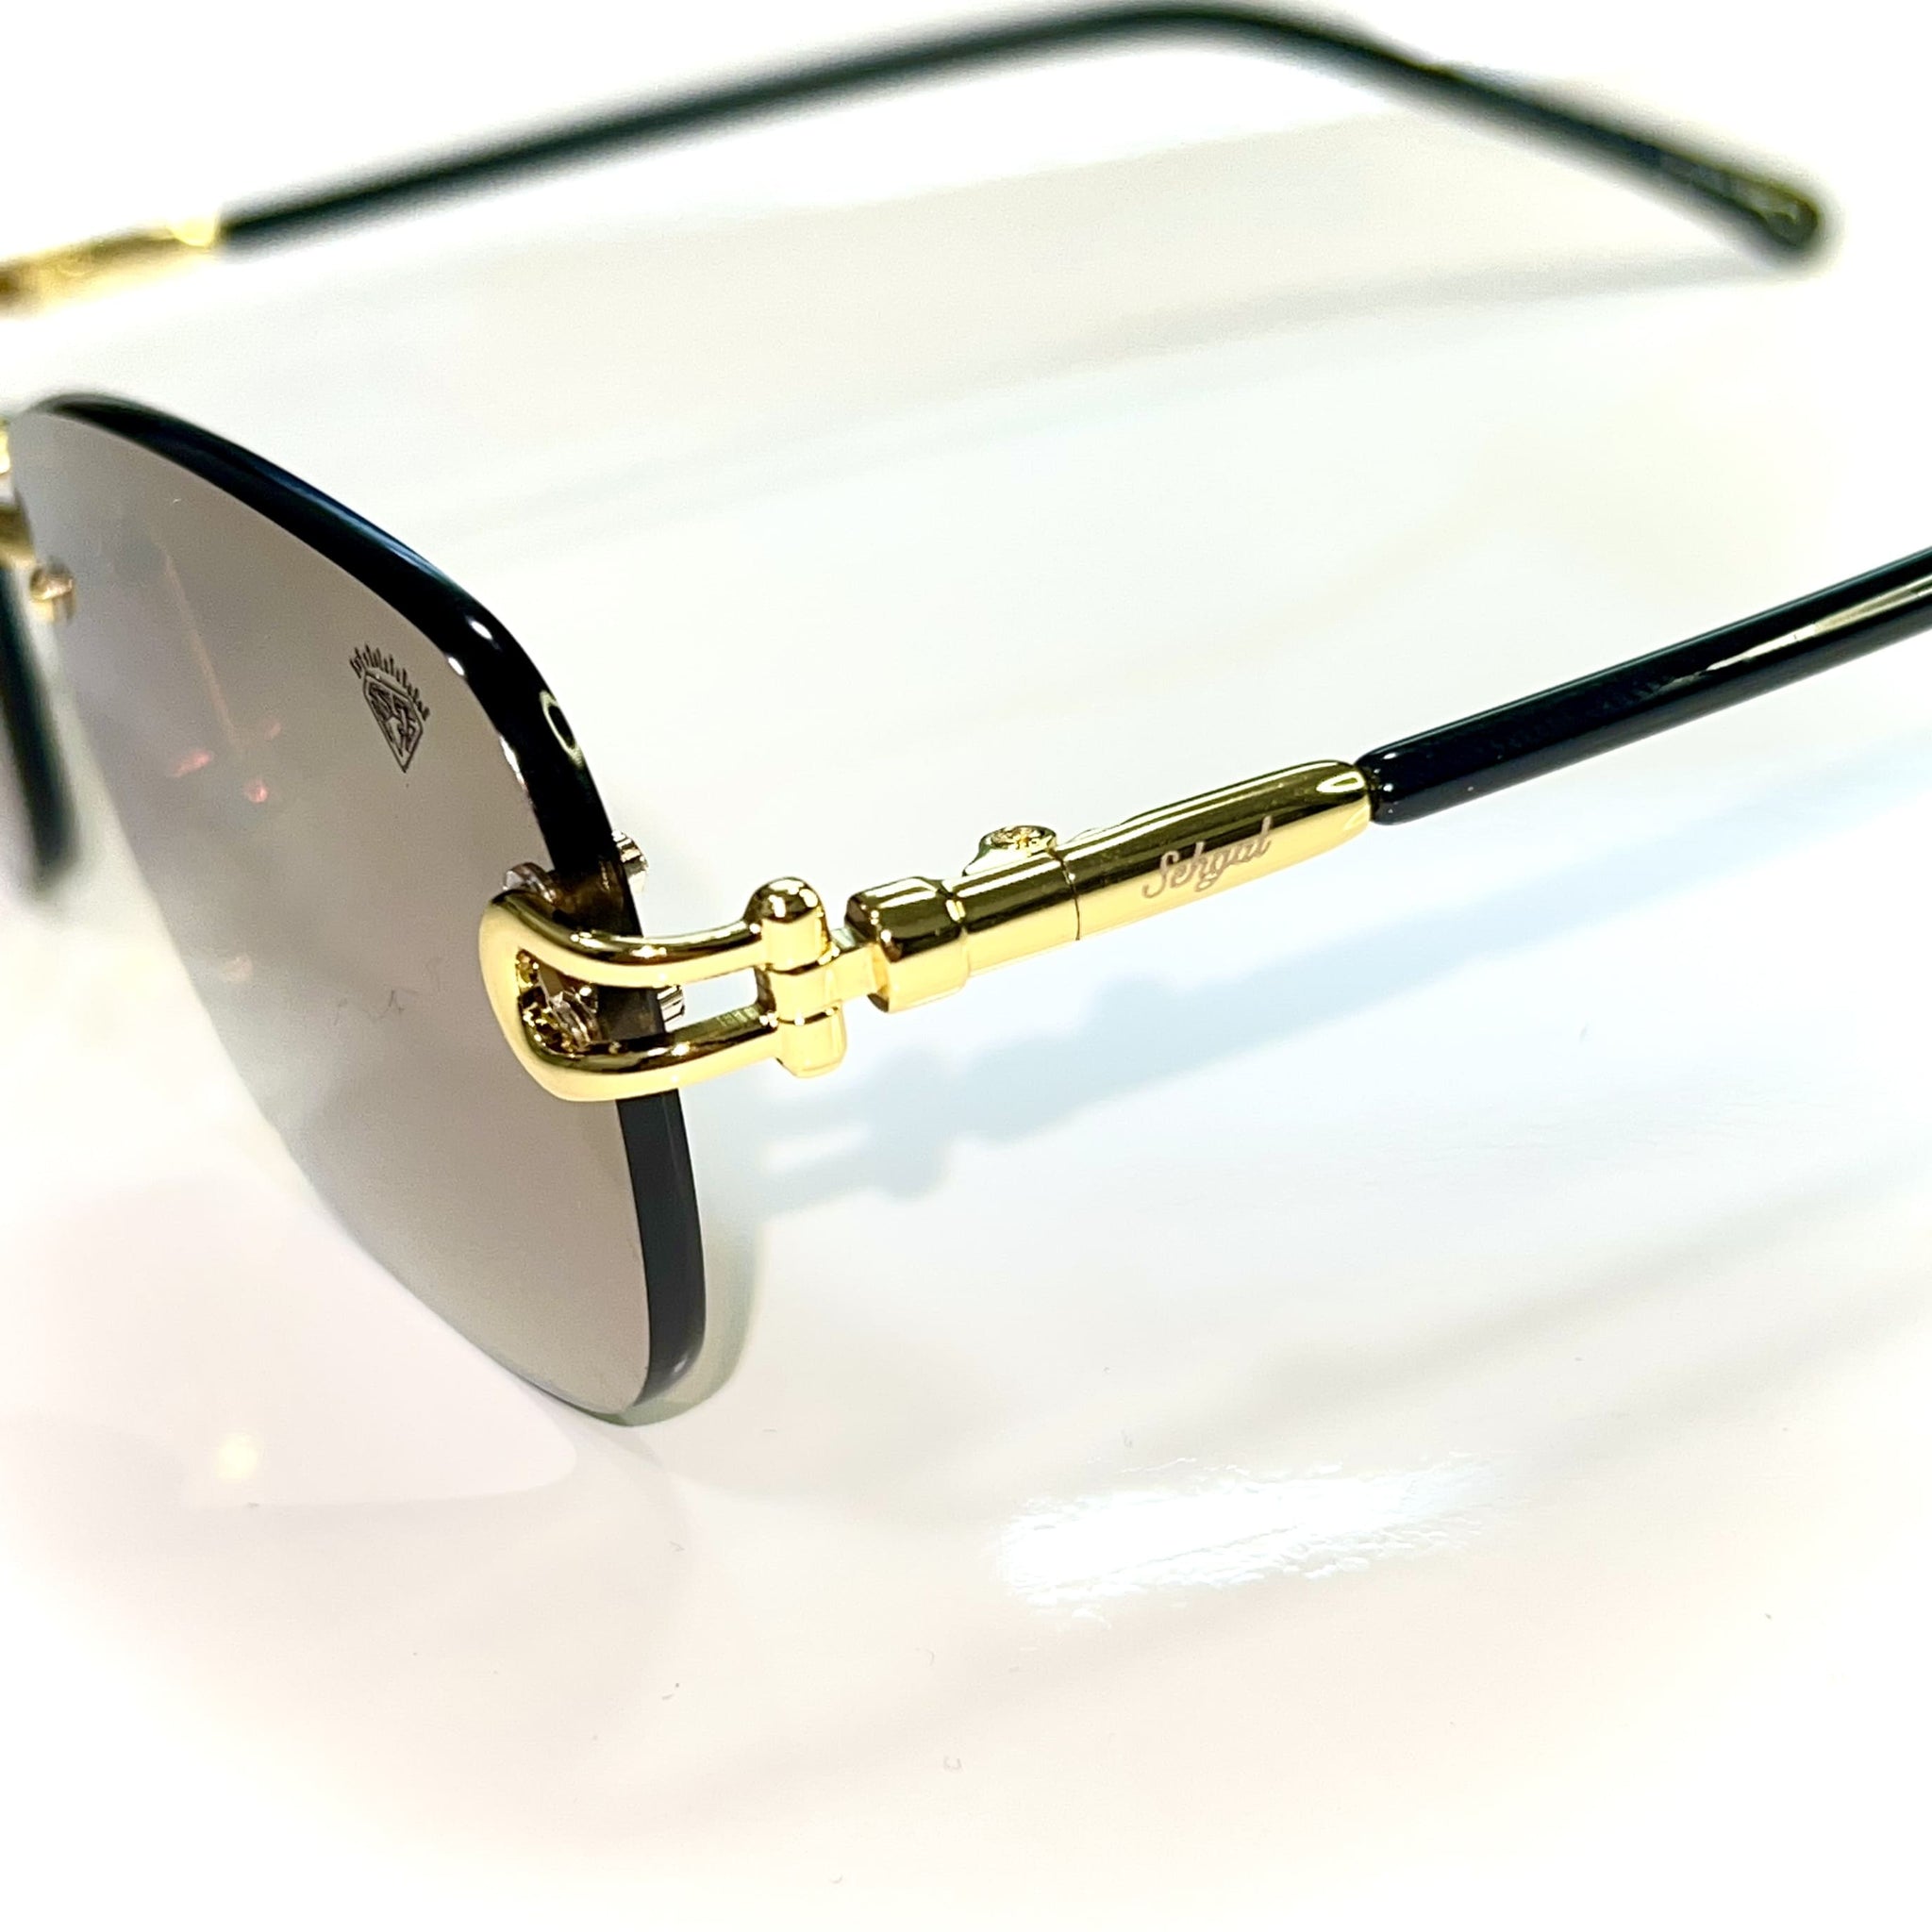 Insane Glasses - Color Changing Shades - 14 carat gold plated / Silicon Side - Sehgal Glasses